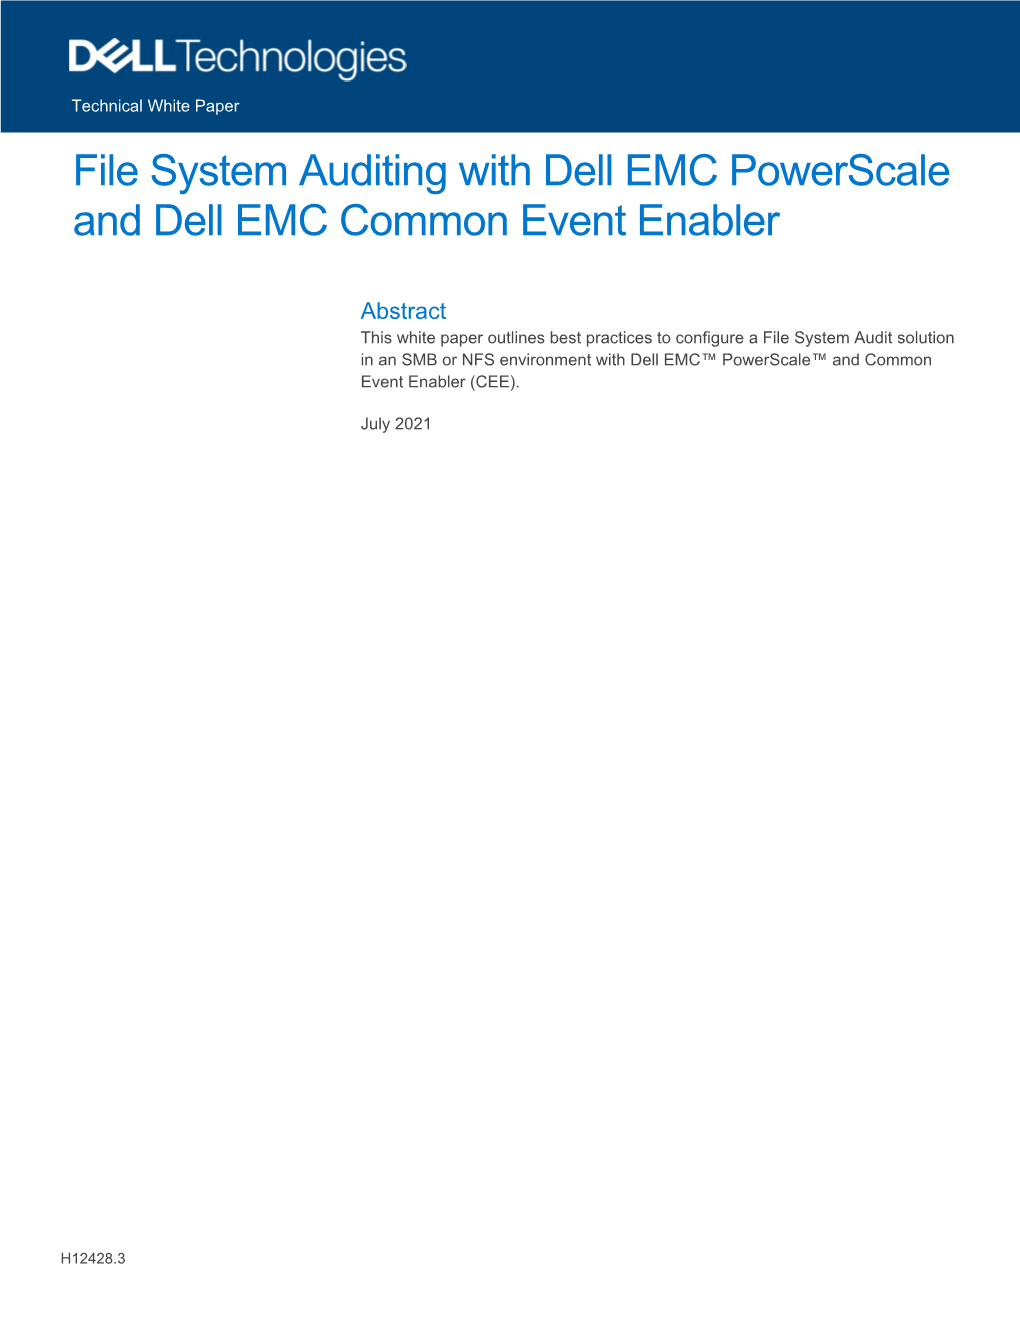 File System Auditing with Dell EMC Powerscale and Dell EMC Common Event Enabler